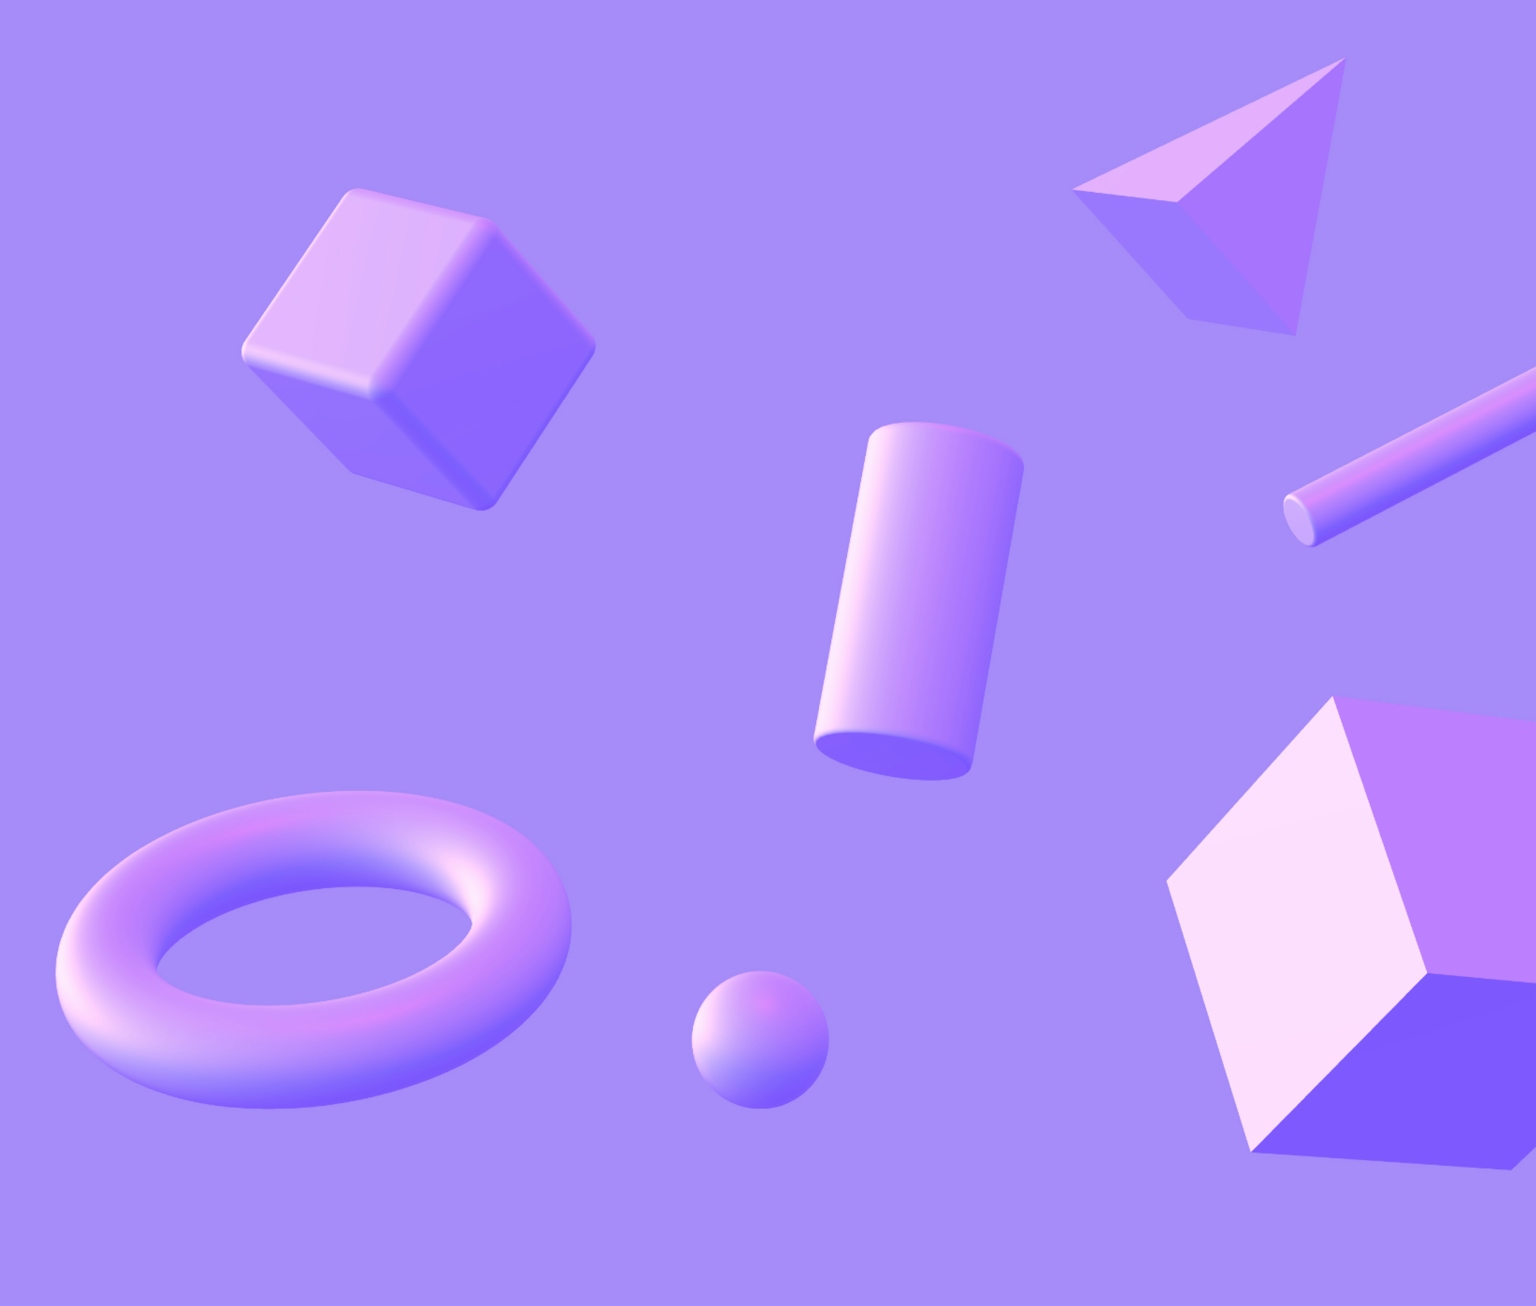 Abstract 3D illustrations and icons